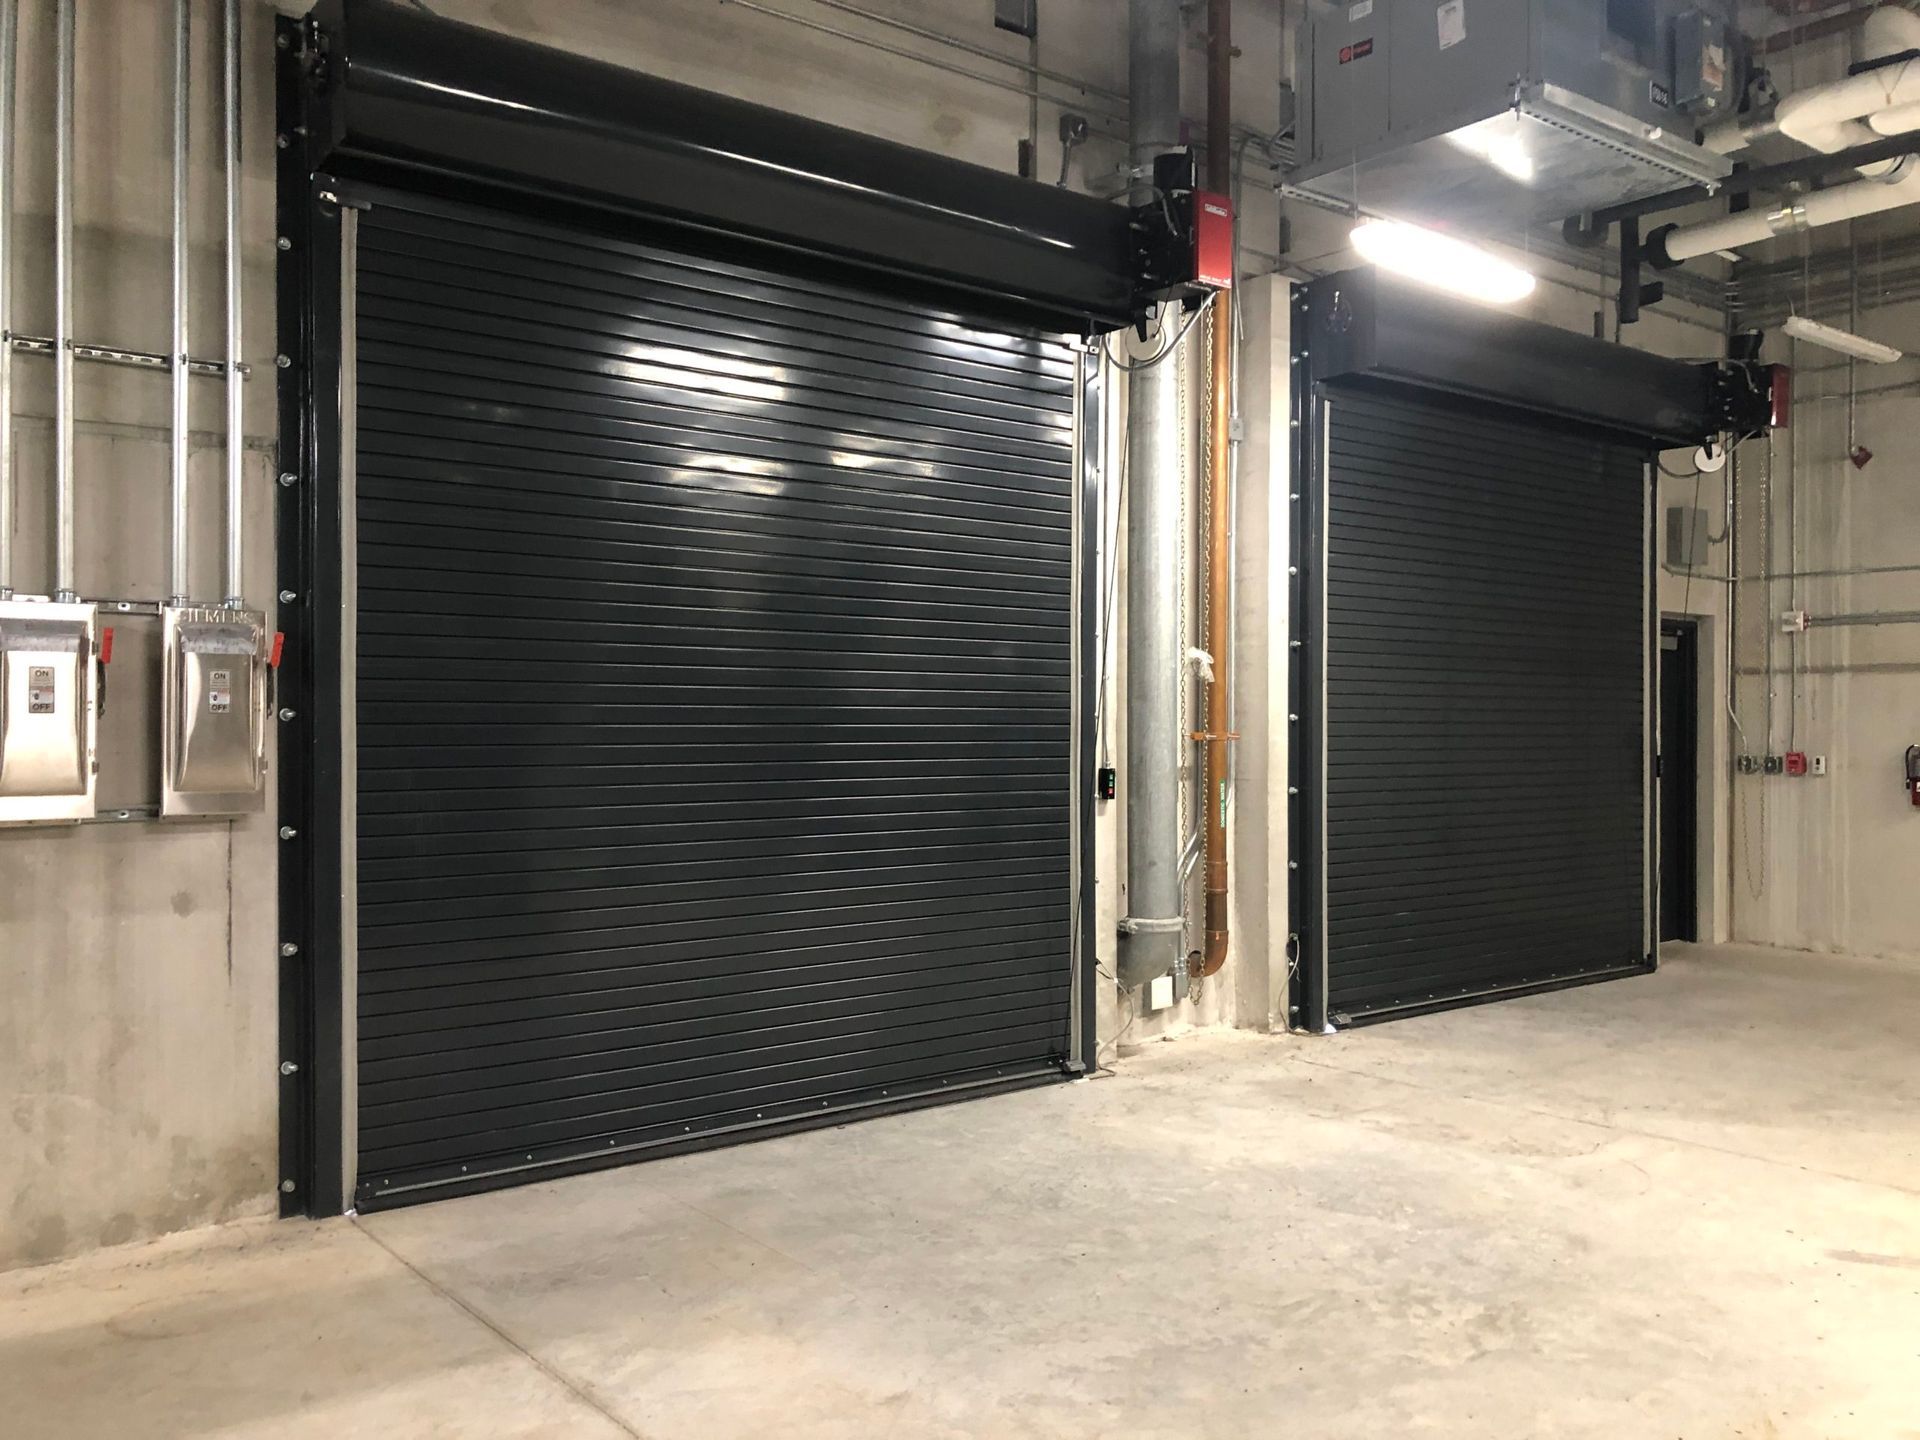 two black garage doors are open in a large room .